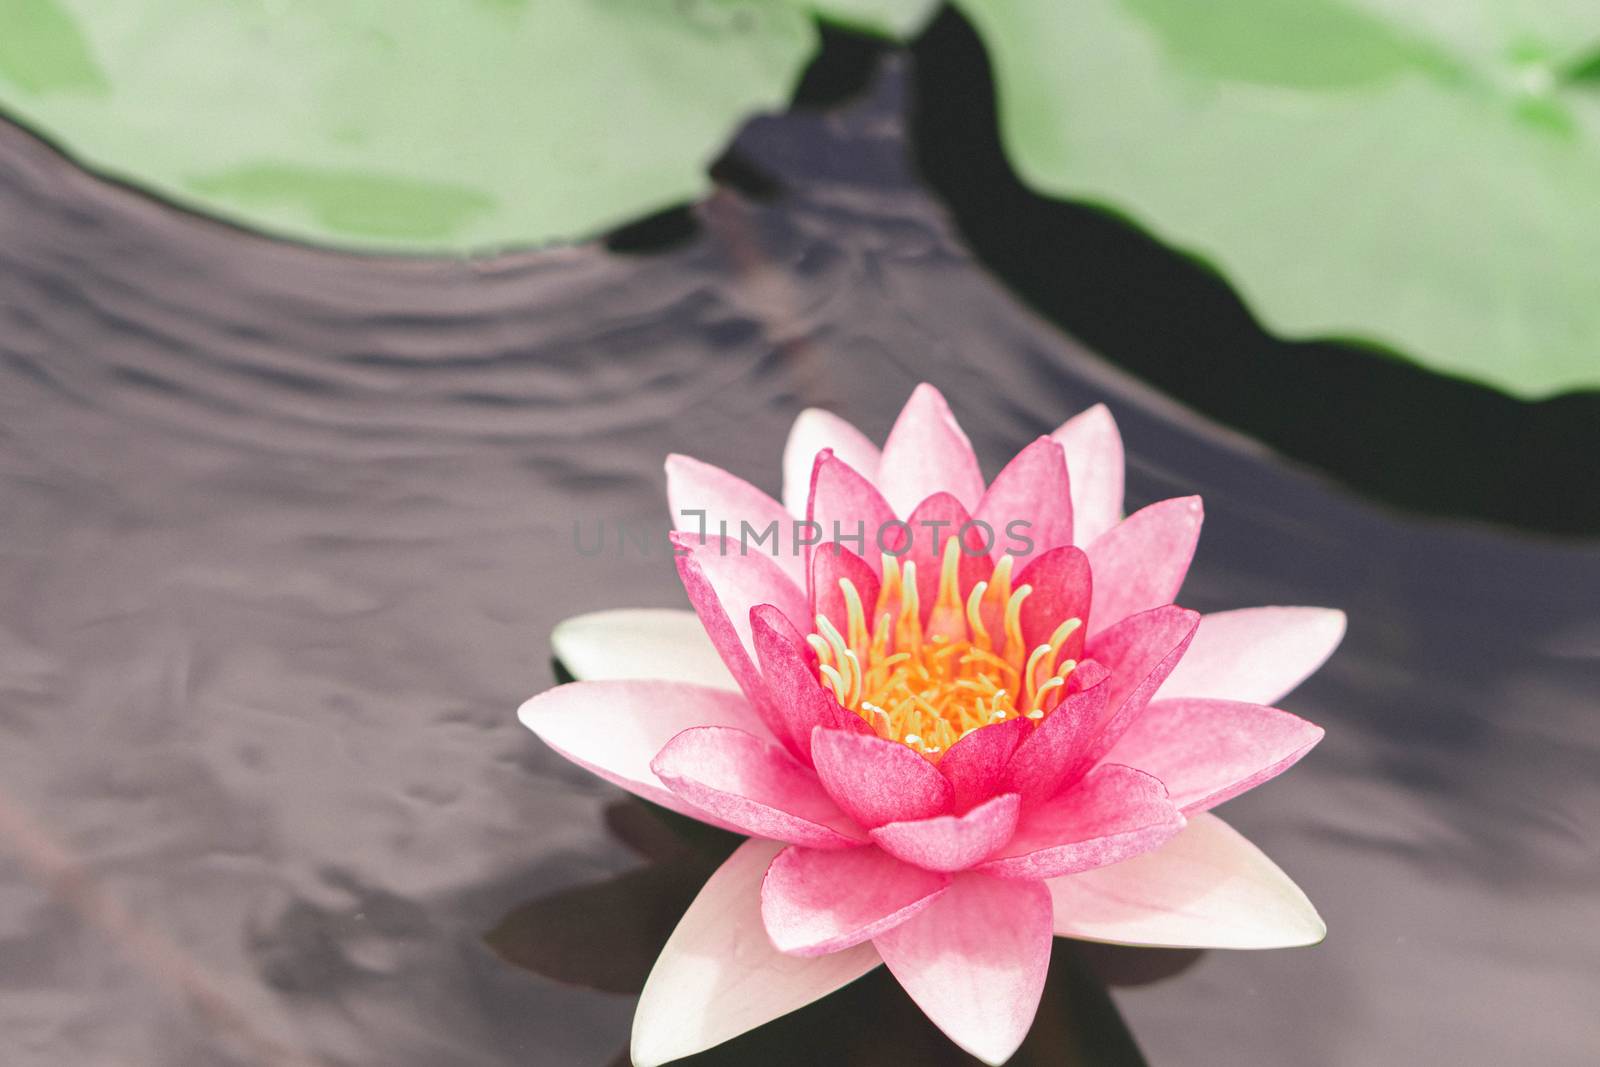 Close up pink lotus flower plant with green leaves, selective focus